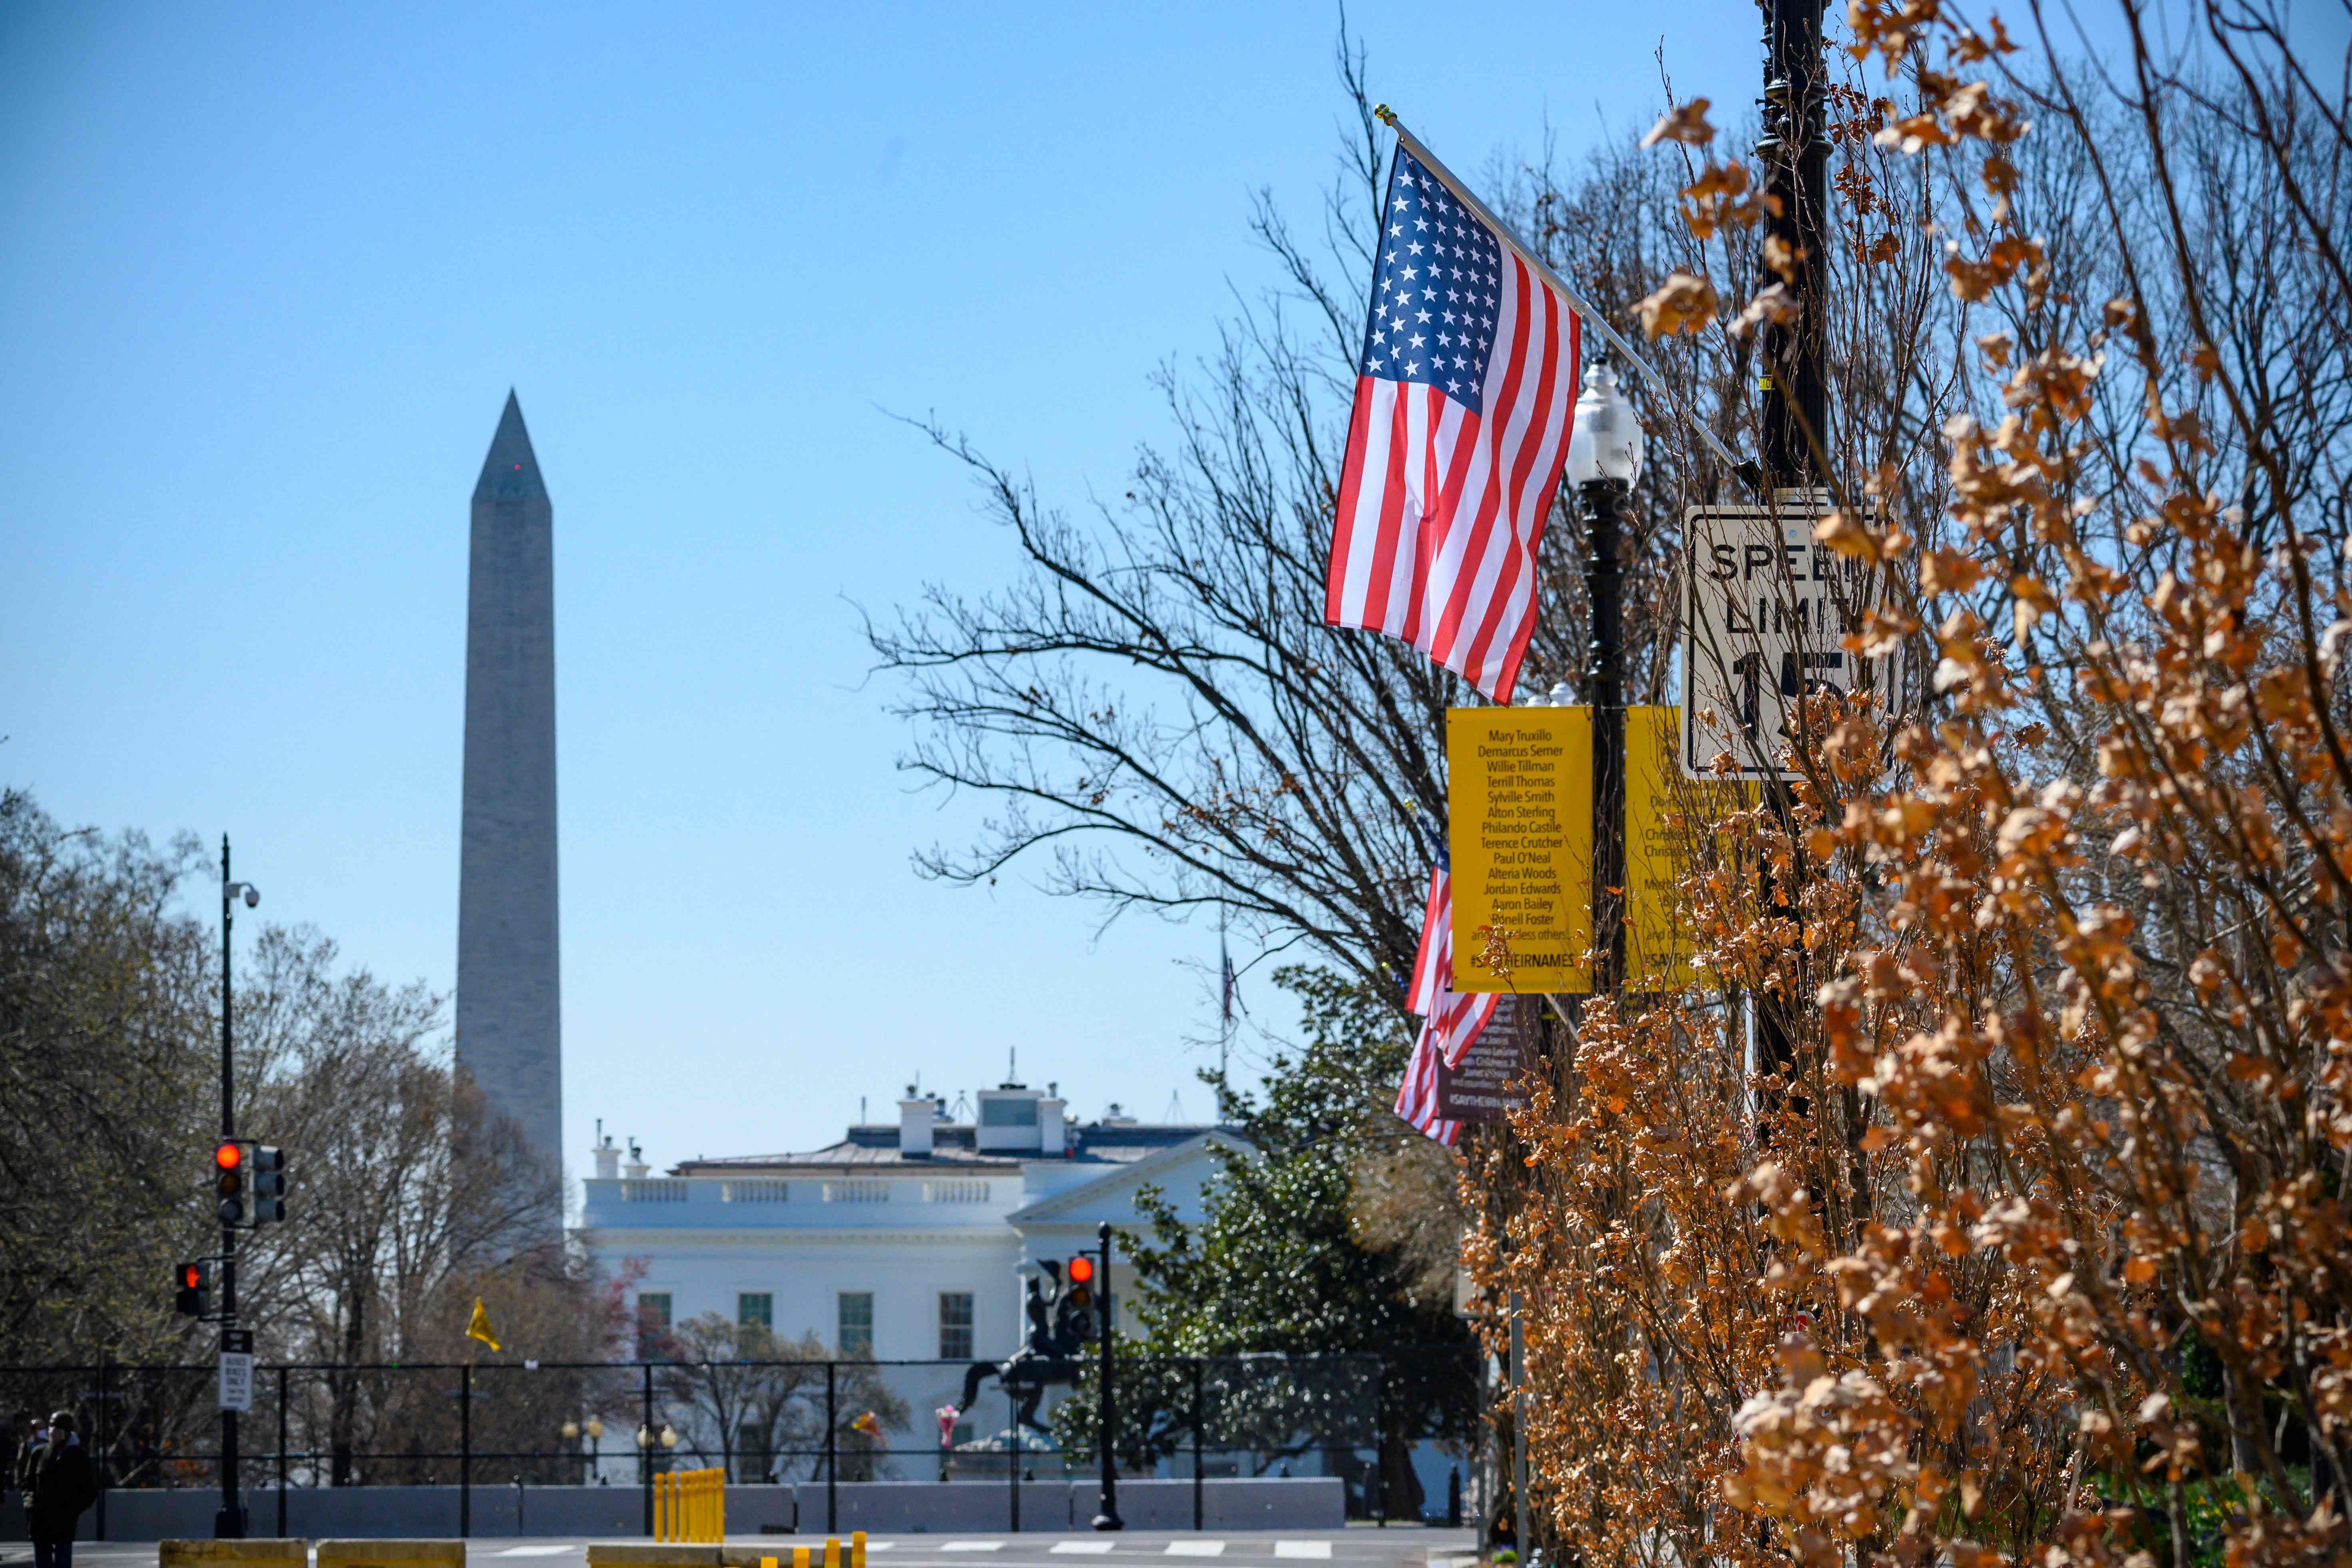 <p>The Stars and Stripes hangs over Black Lives Matter Plaza in Washington DC – with an extra star symbolising the ambition of making the District of Columbia the 51st state of the USA</p>